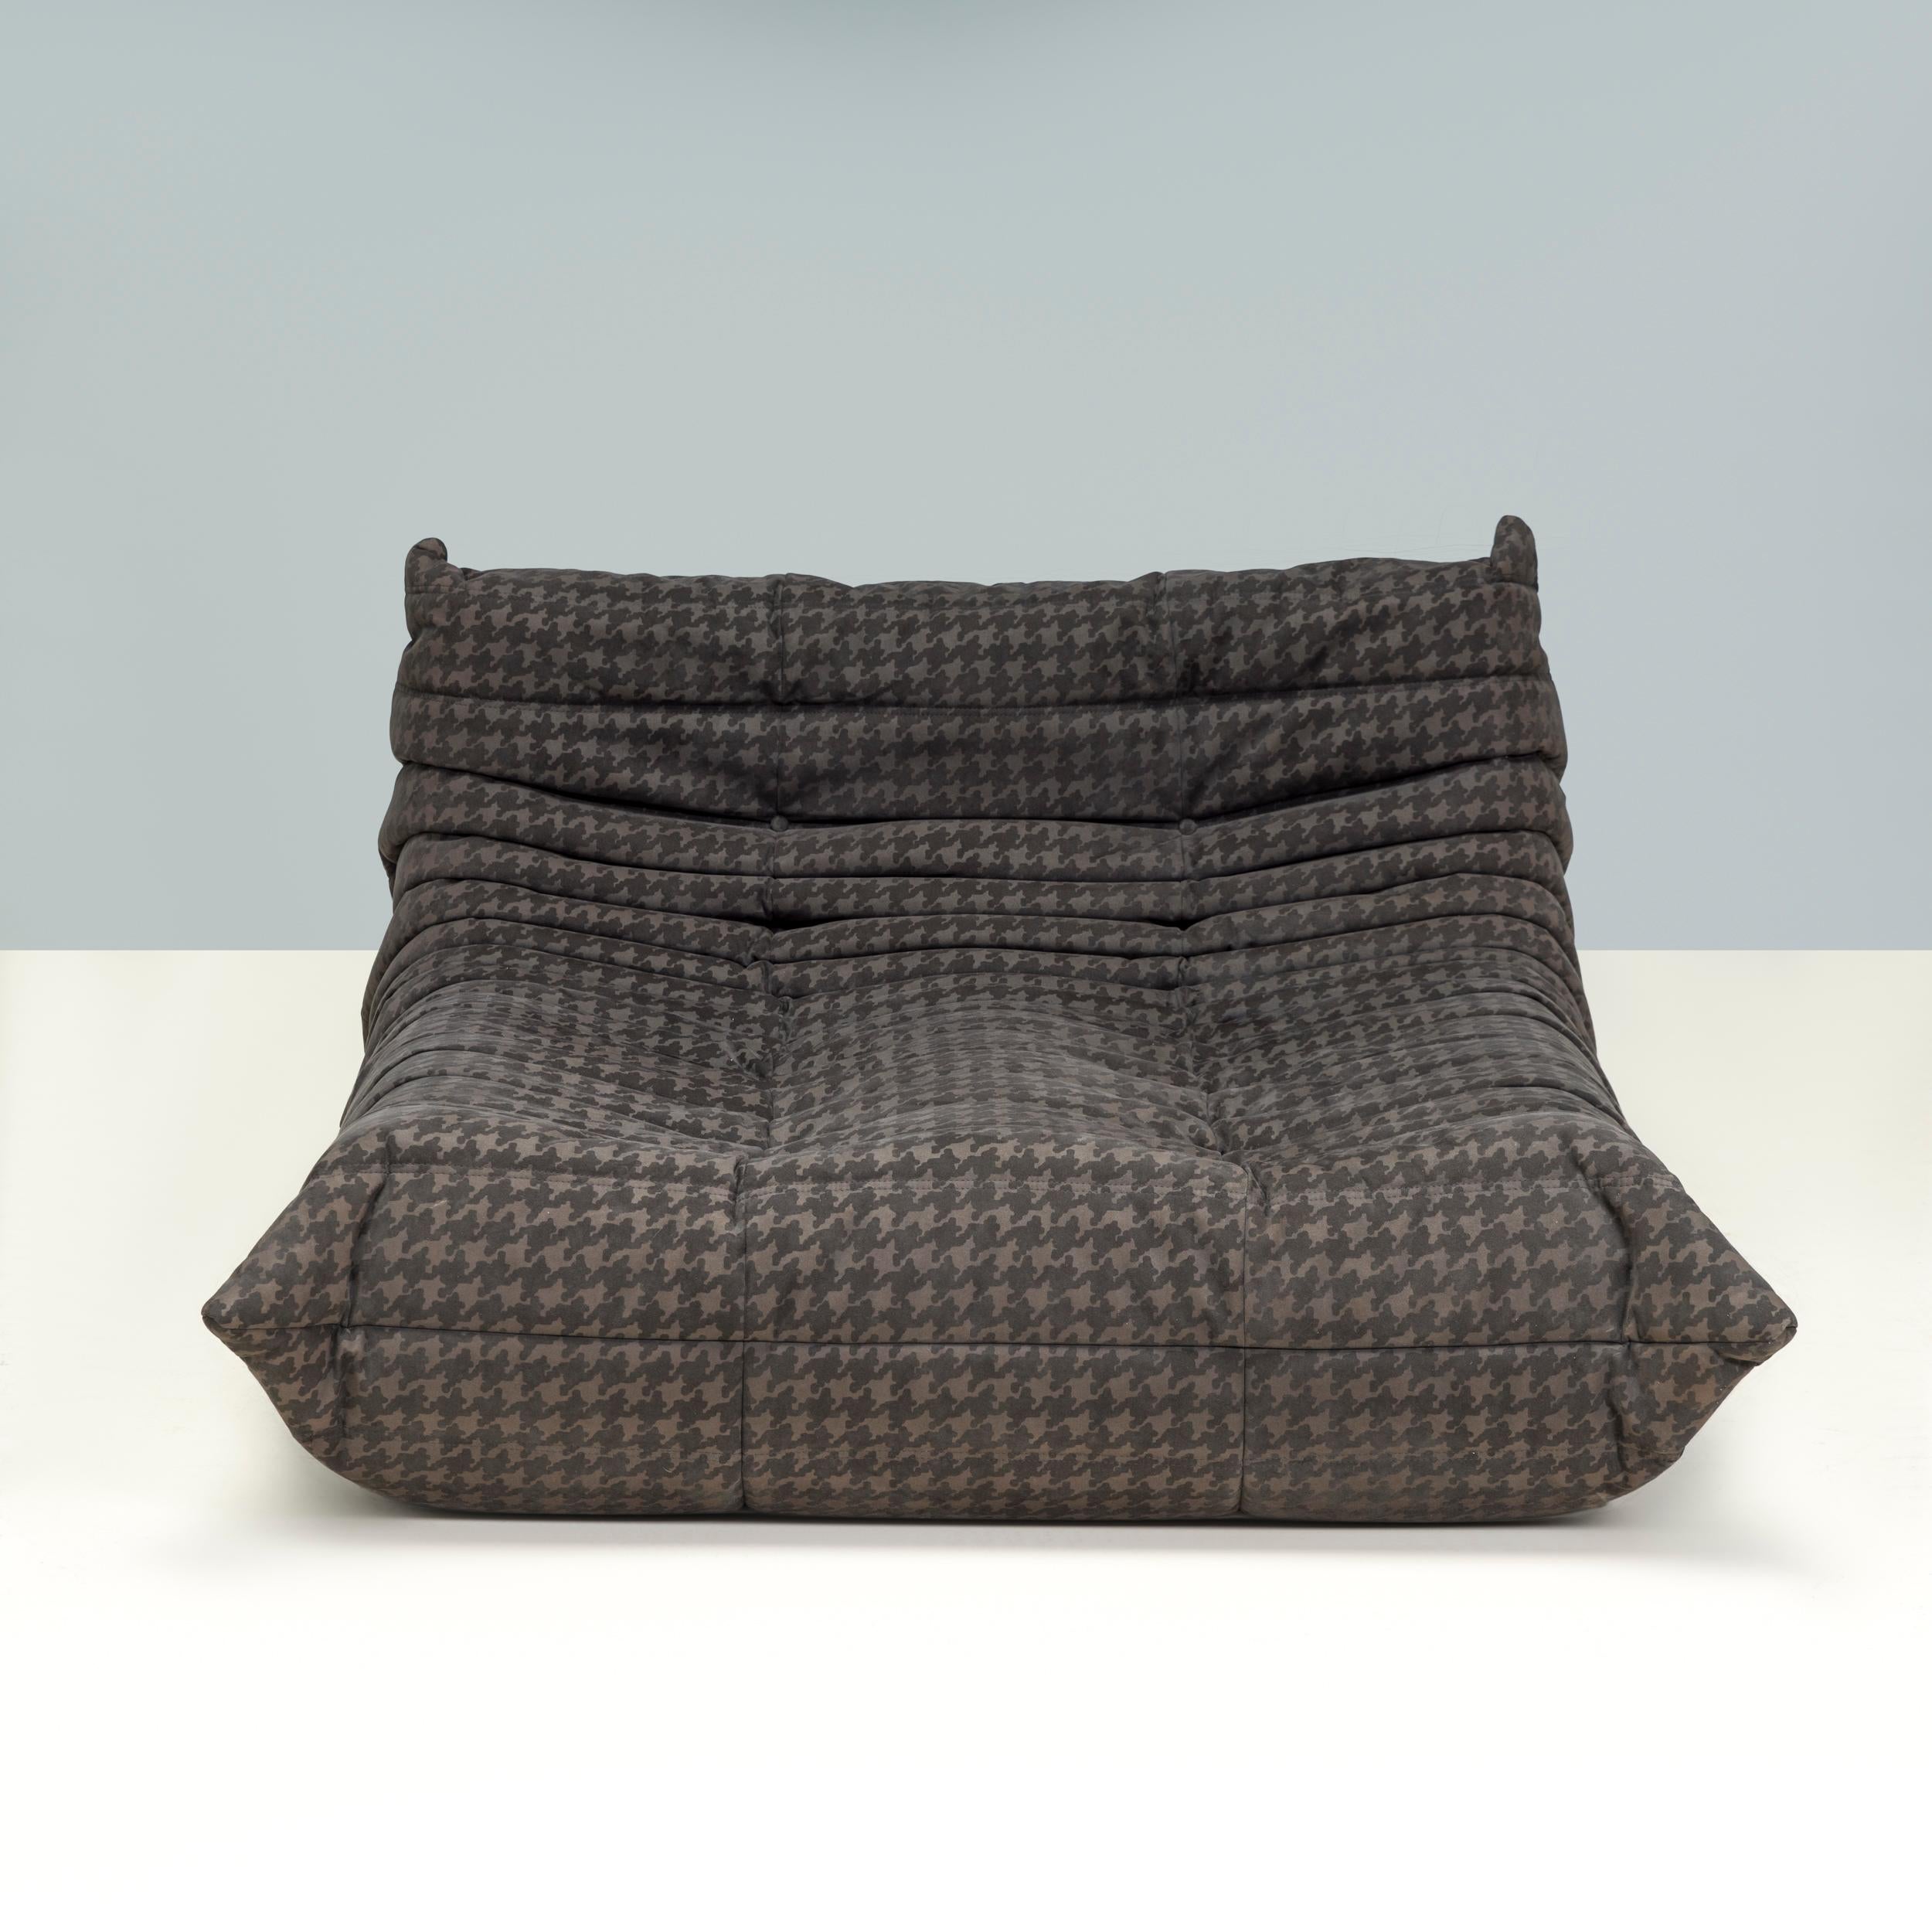 The iconic Togo sofa, originally designed by Michael Ducaroy for Ligne Roset in 1973, has become a design classic. 

This chaise longue model is upholstered in the original brown houndstooth alcantara fabric and features the instantly recognisable